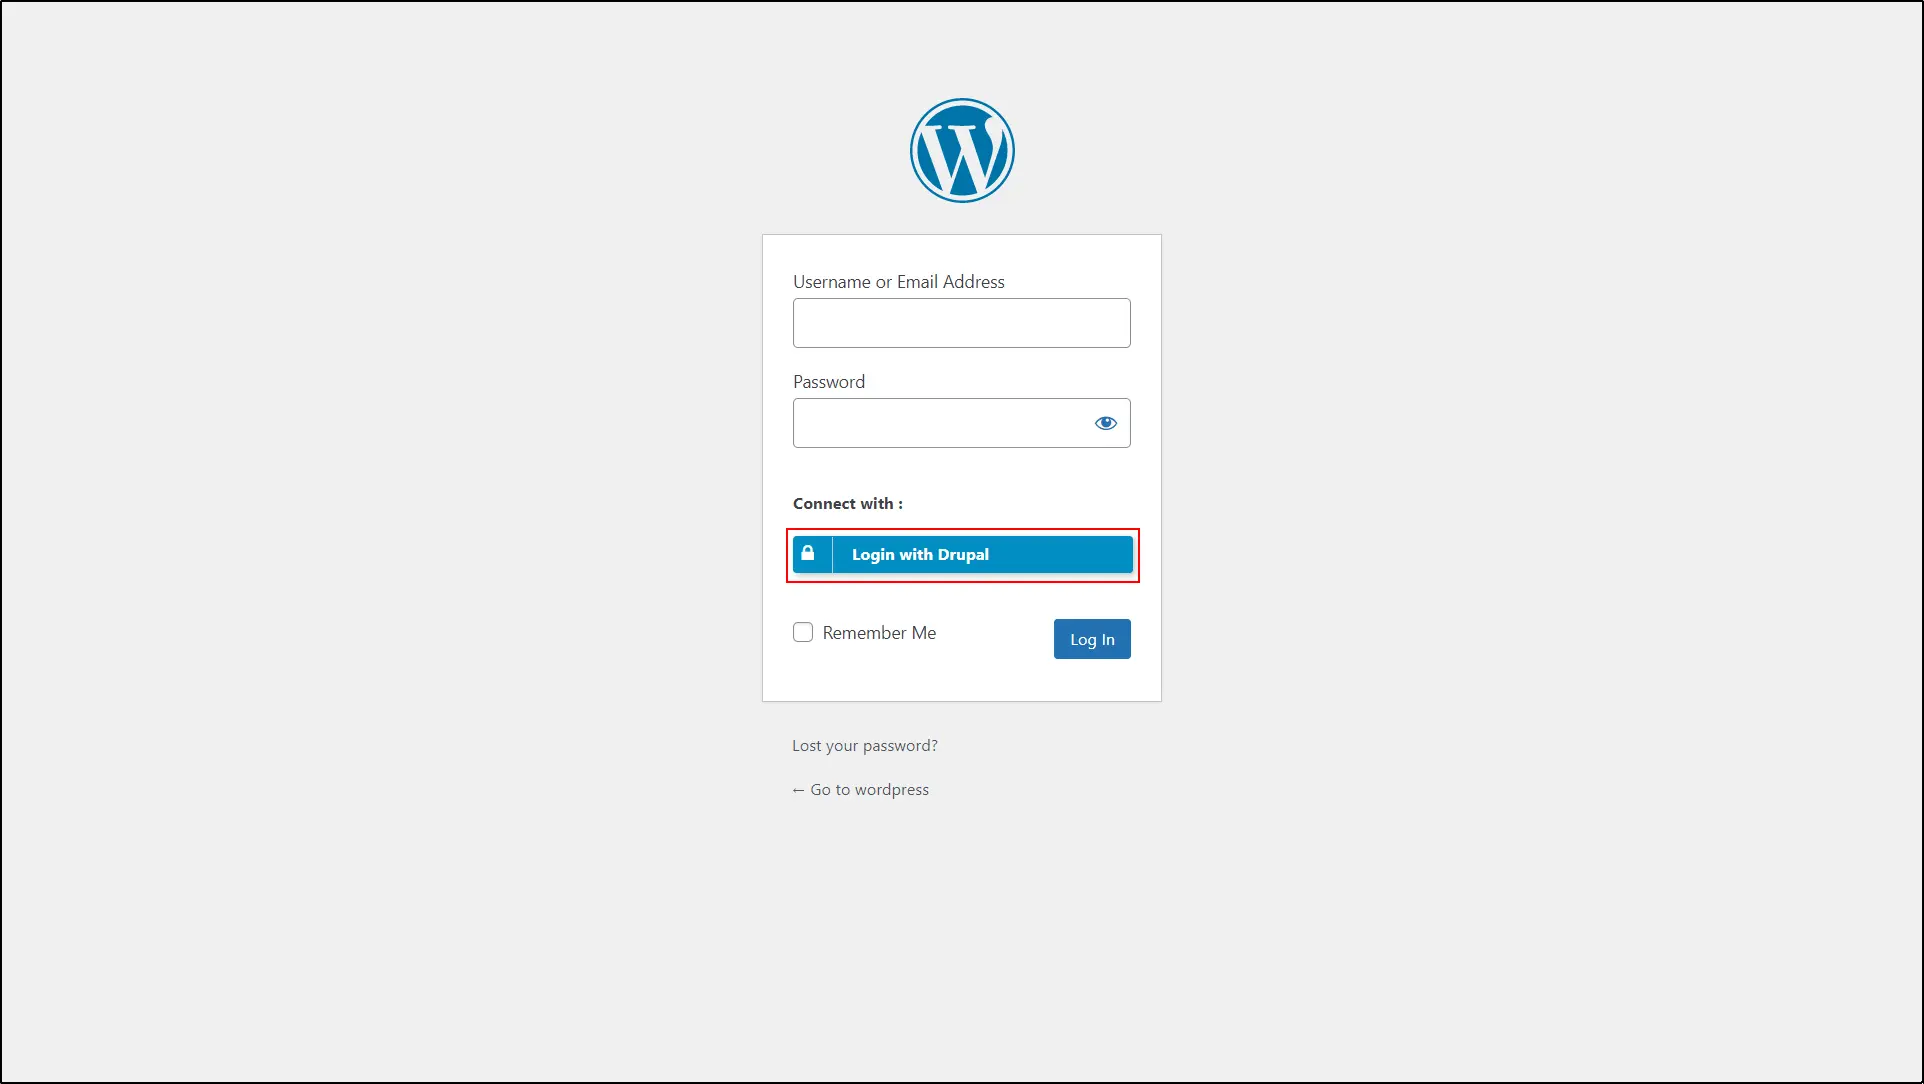 Test SSO Connection between WordPress and Drupal OIDC Provider - Click on Login with Drupal